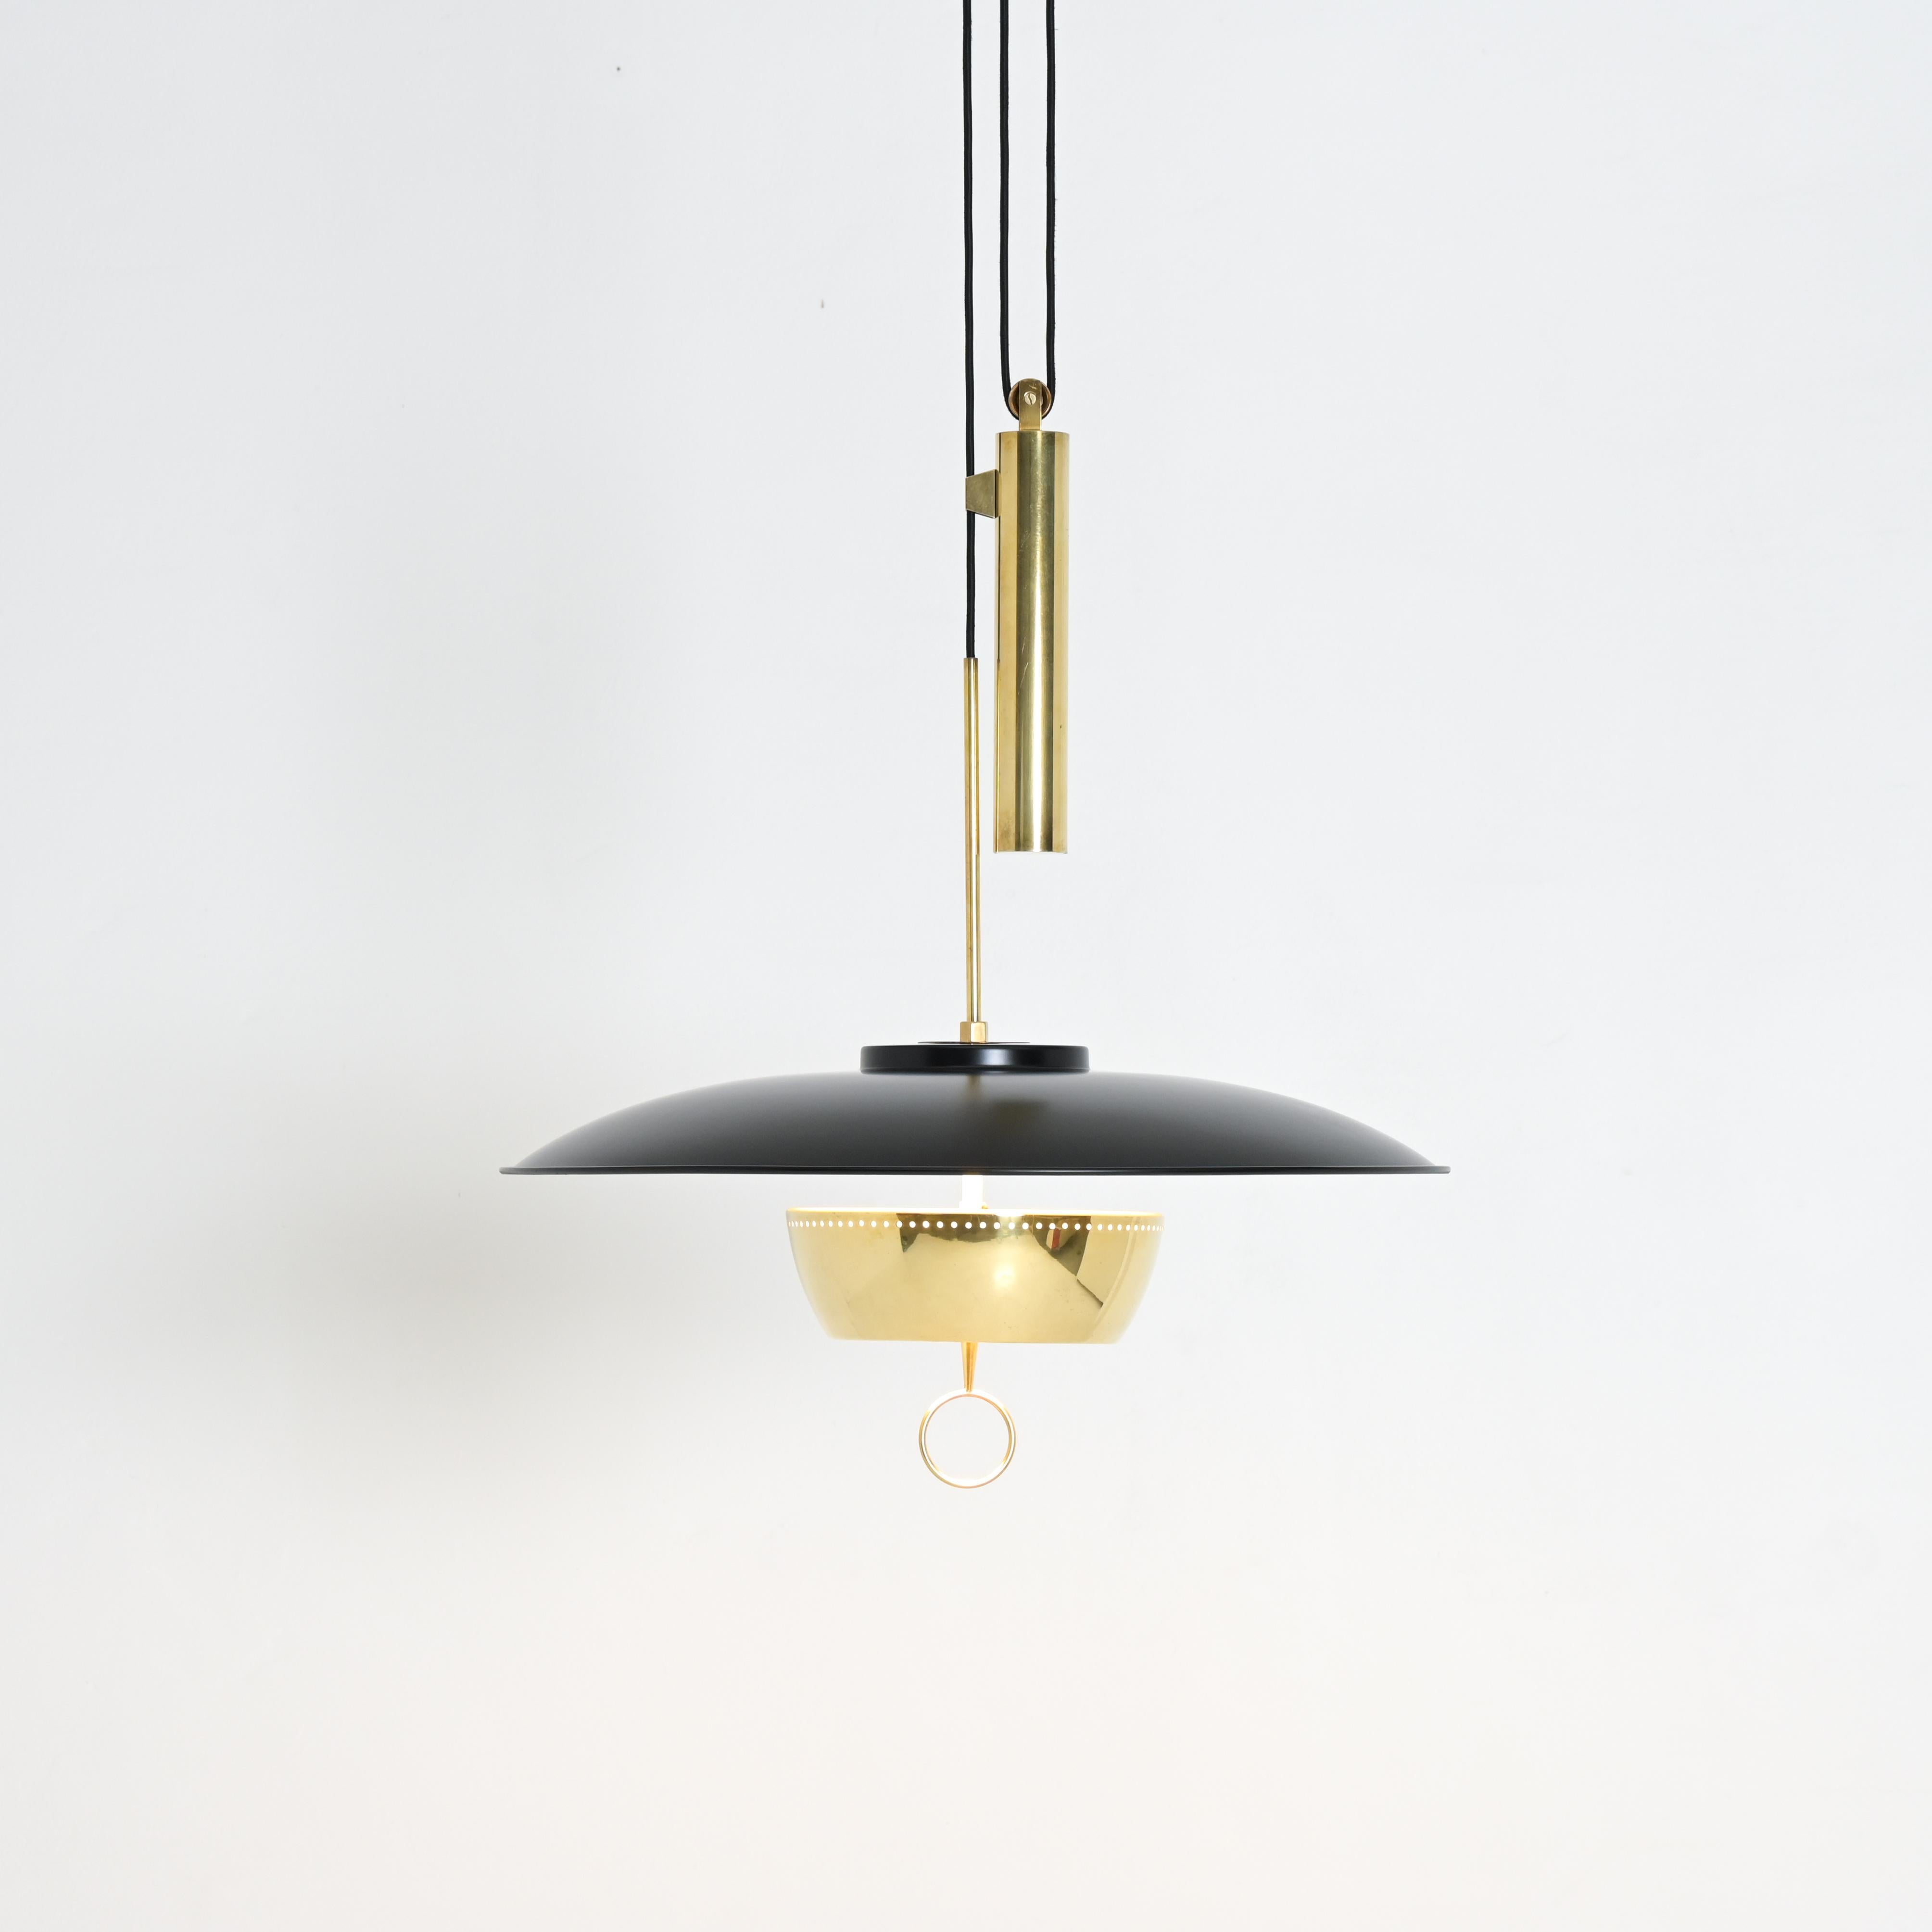 This elegant, dynamic, Mid-Century Modern pendant lamp A5011 was designed by Gaetano Scolari for Stilnovo in 1950. The lamp is made of metal, brass and glass. The height is adjustable with the counterweight. The white inside of the shade reflects